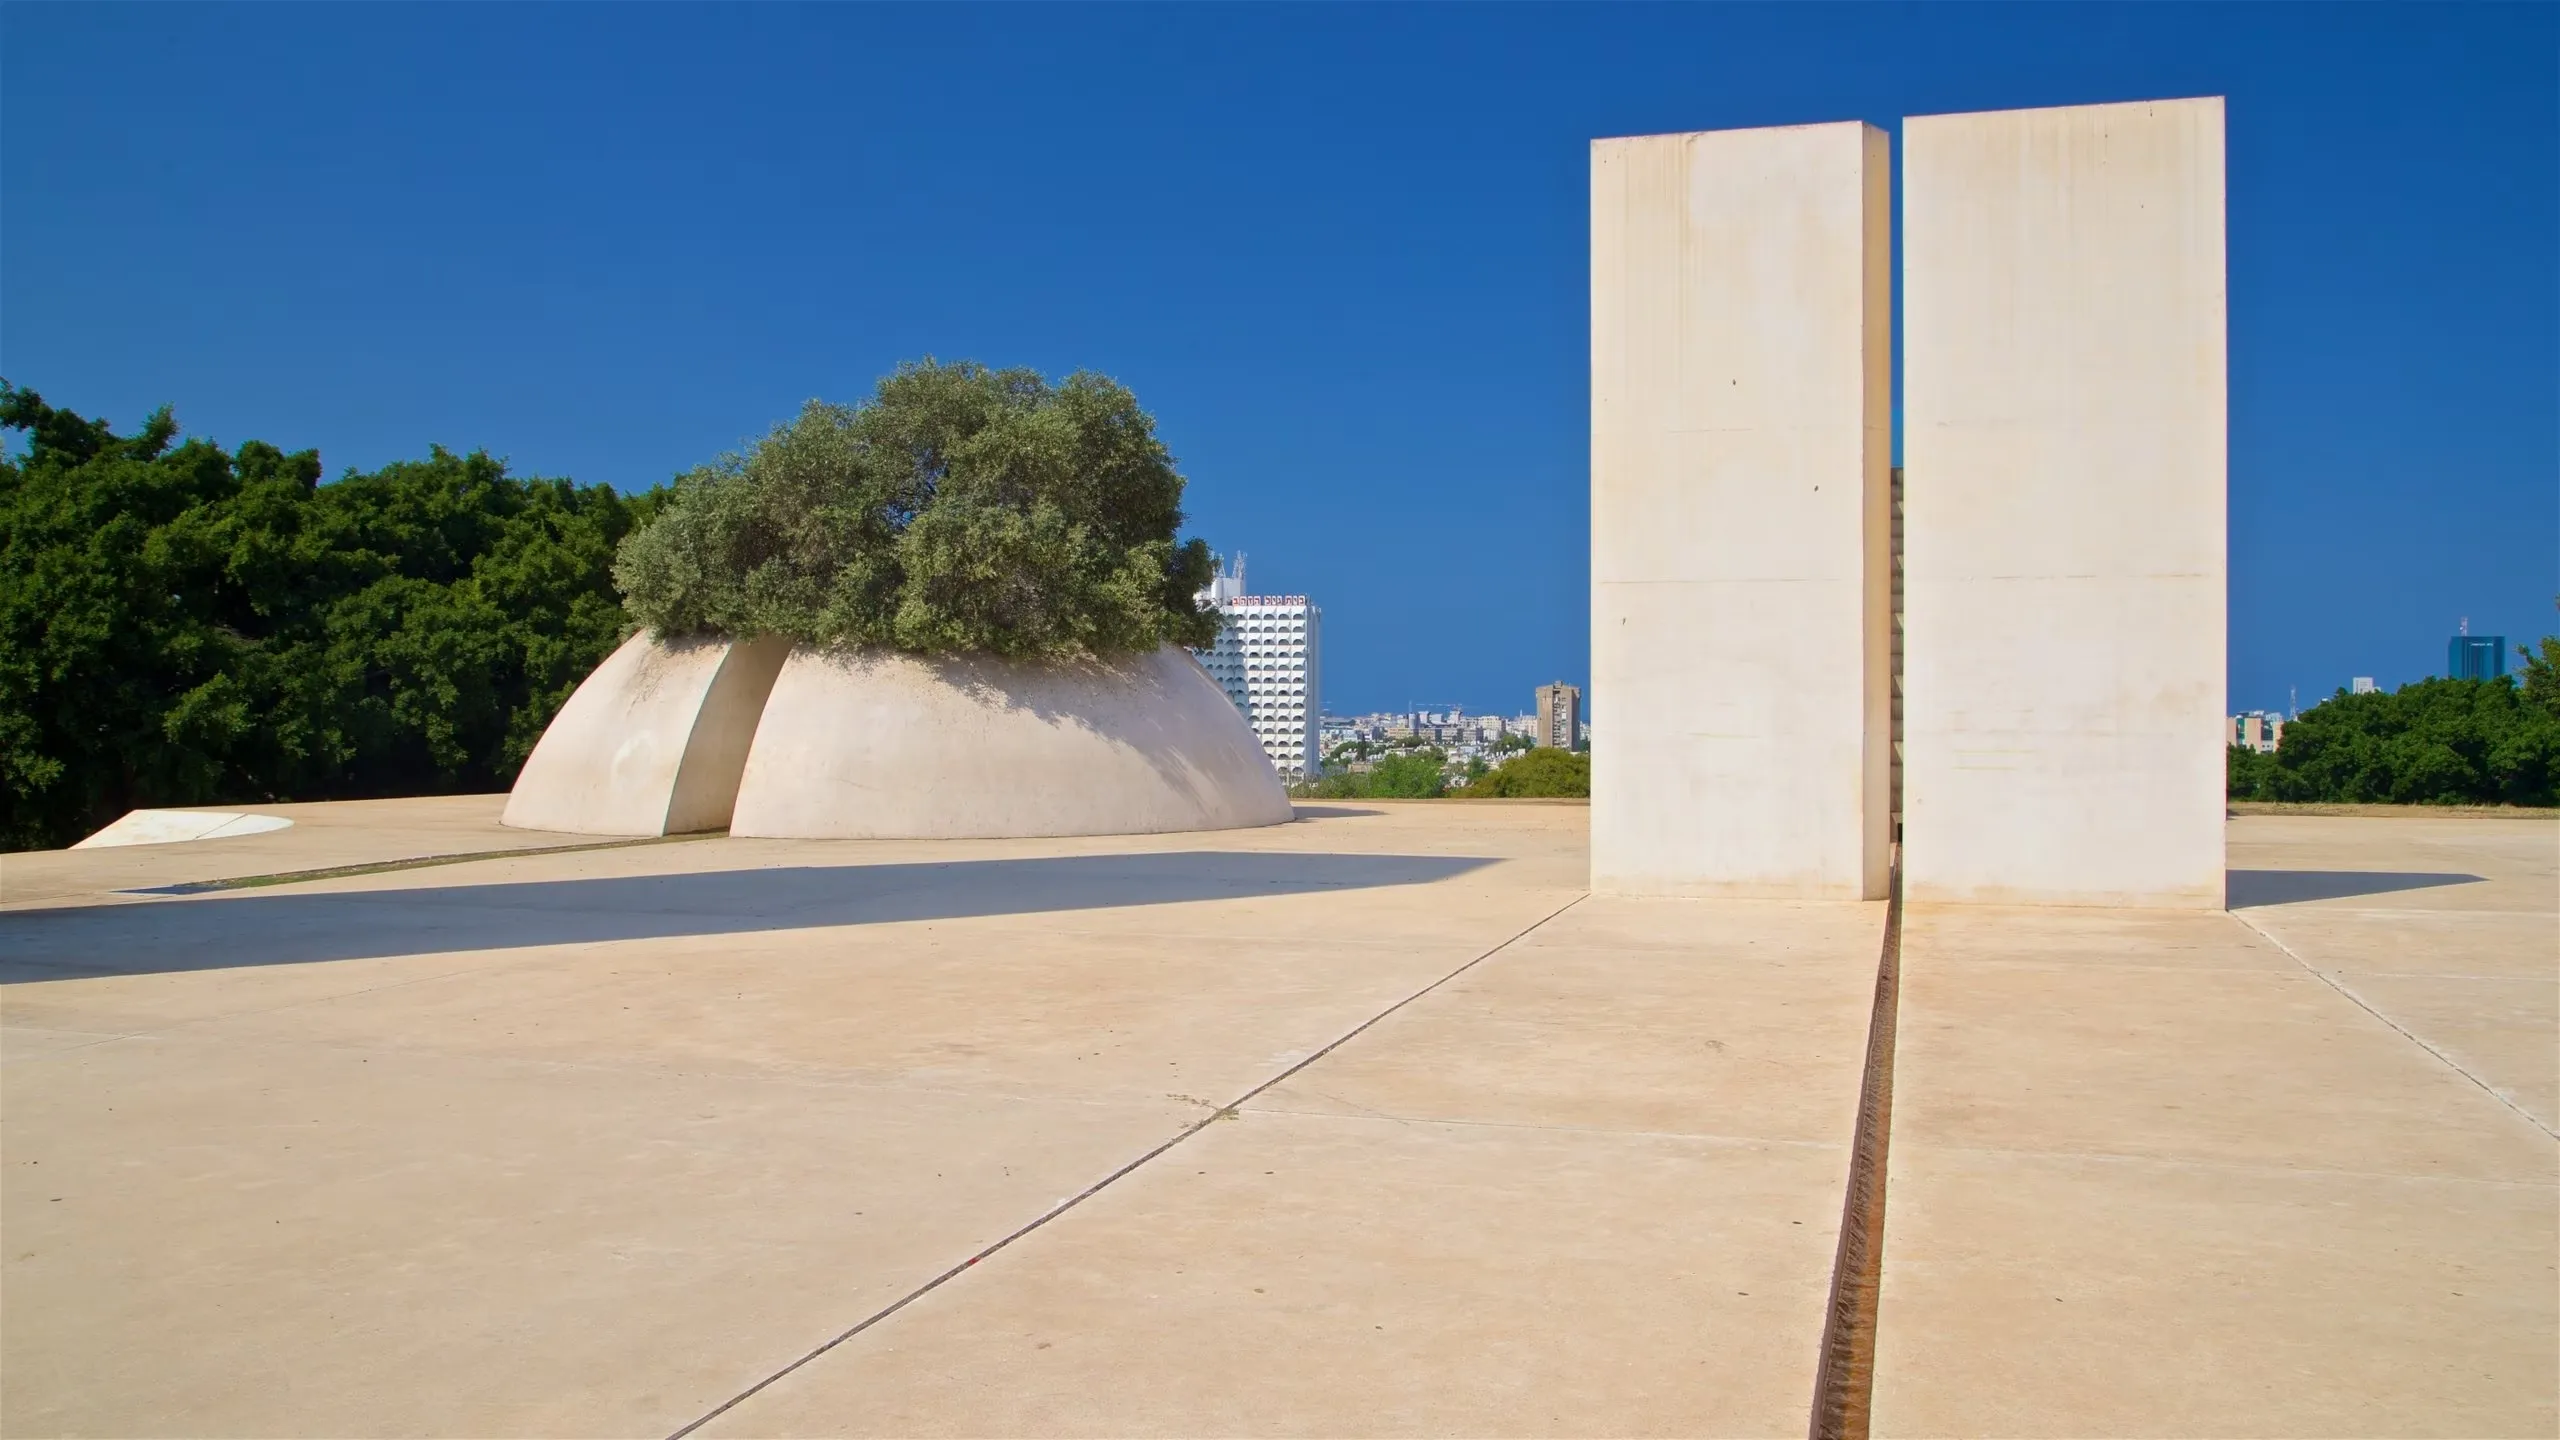 Edith Wolfson Park in Israel, Middle East | Parks - Rated 3.7